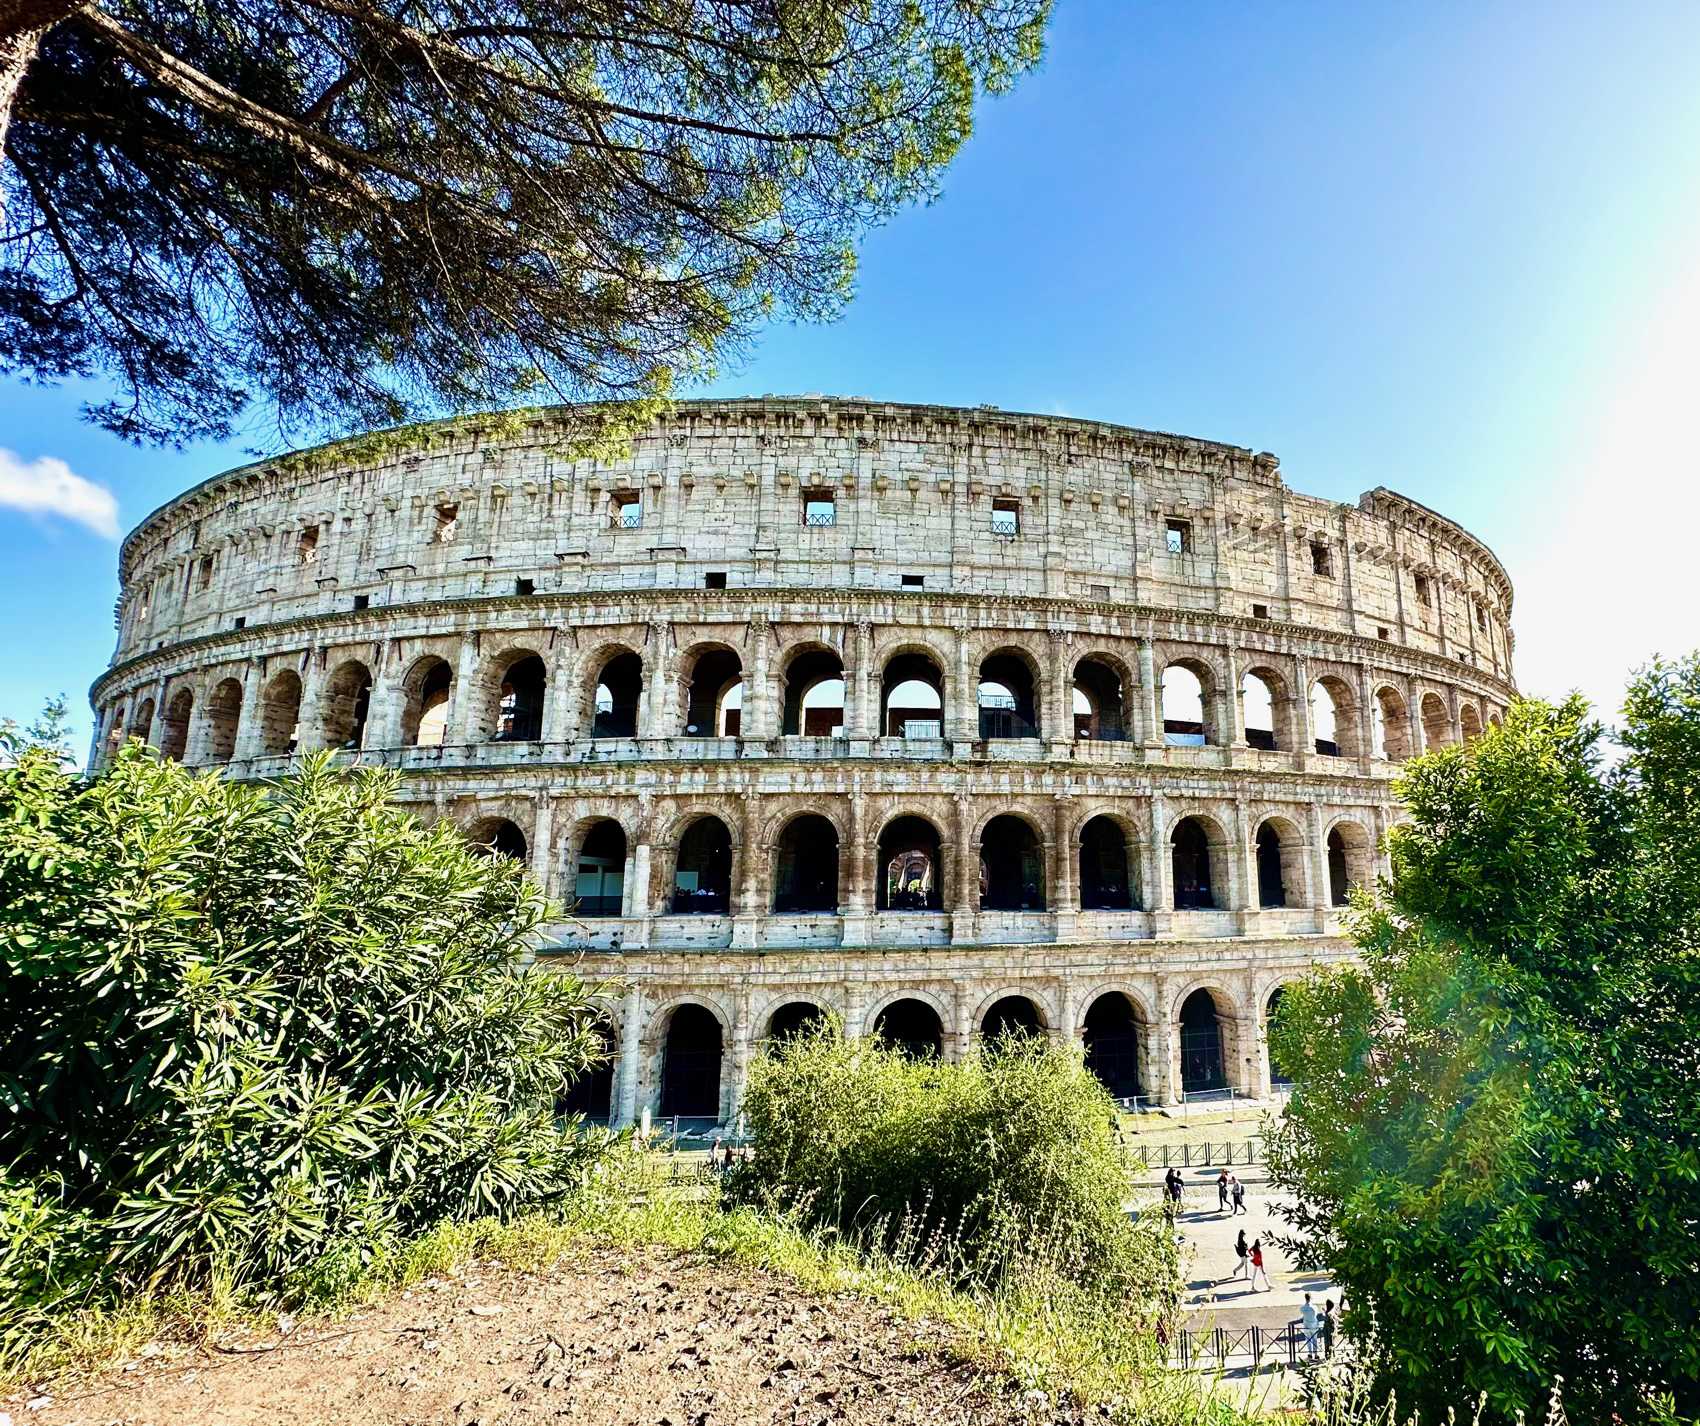 The Colosseum in Rome. Discover This Incredible Wonder